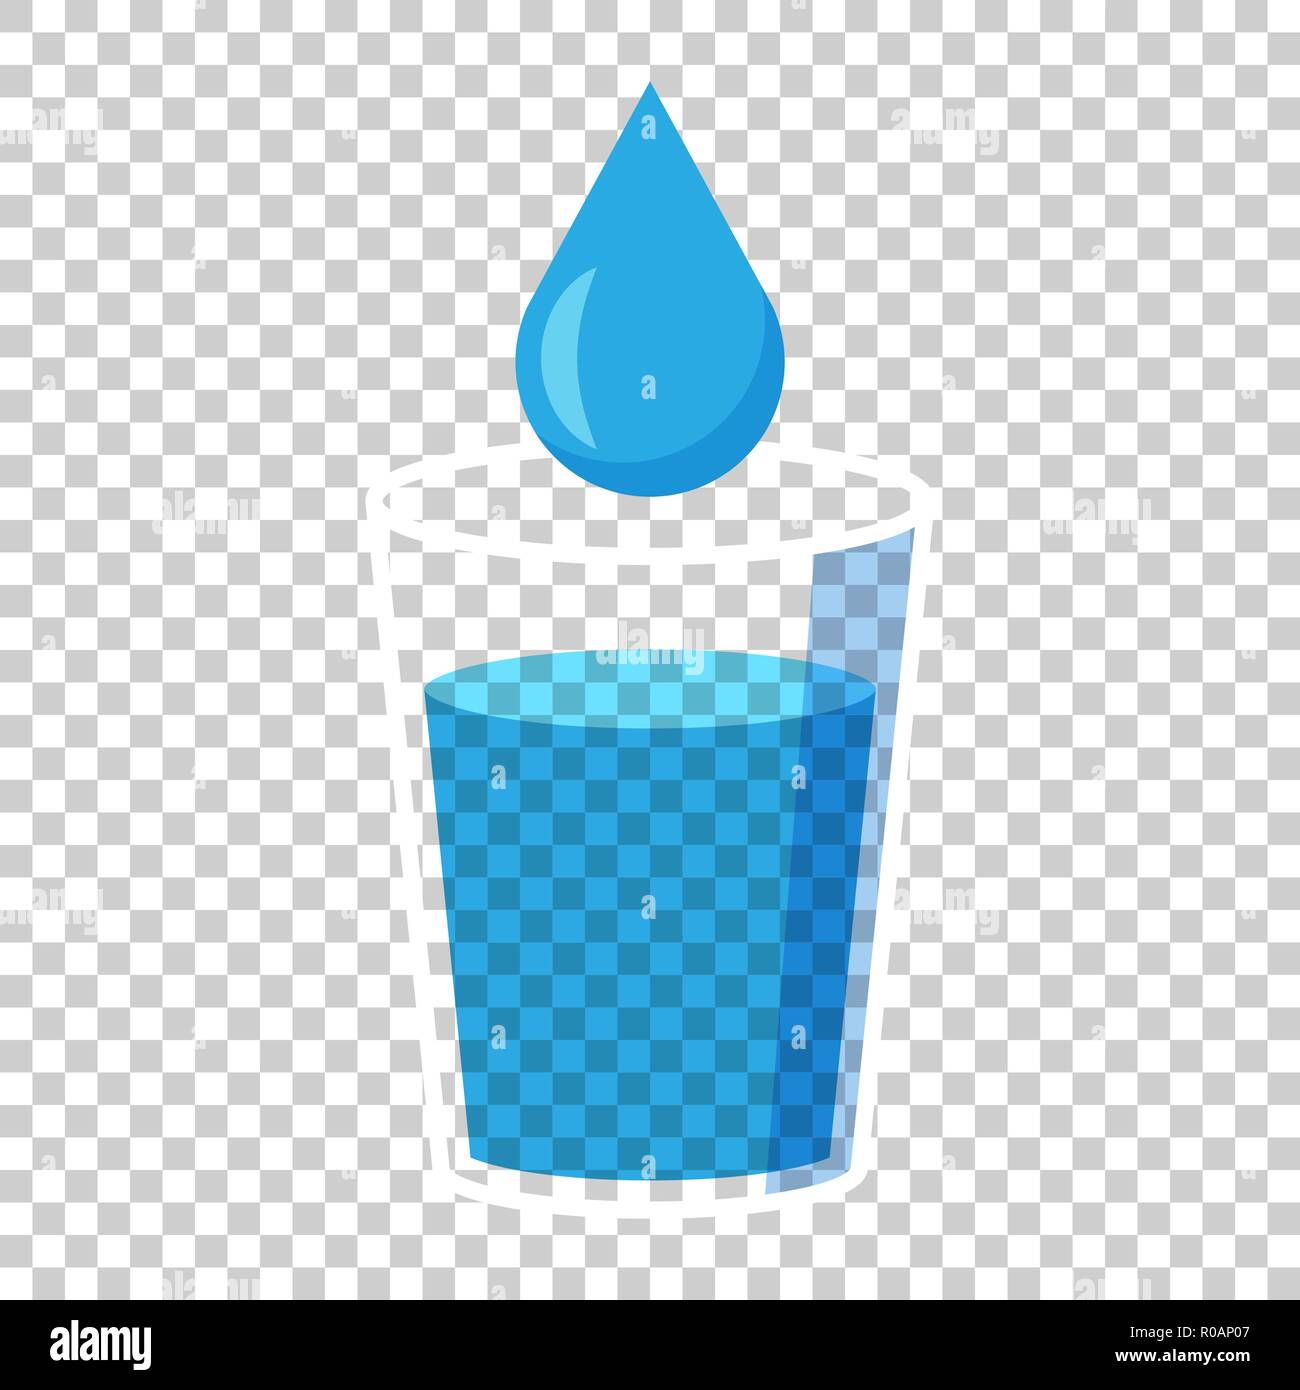 https://c8.alamy.com/comp/R0AP07/water-glass-icon-in-flat-style-soda-glass-vector-illustration-on-isolated-background-liquid-water-business-concept-R0AP07.jpg